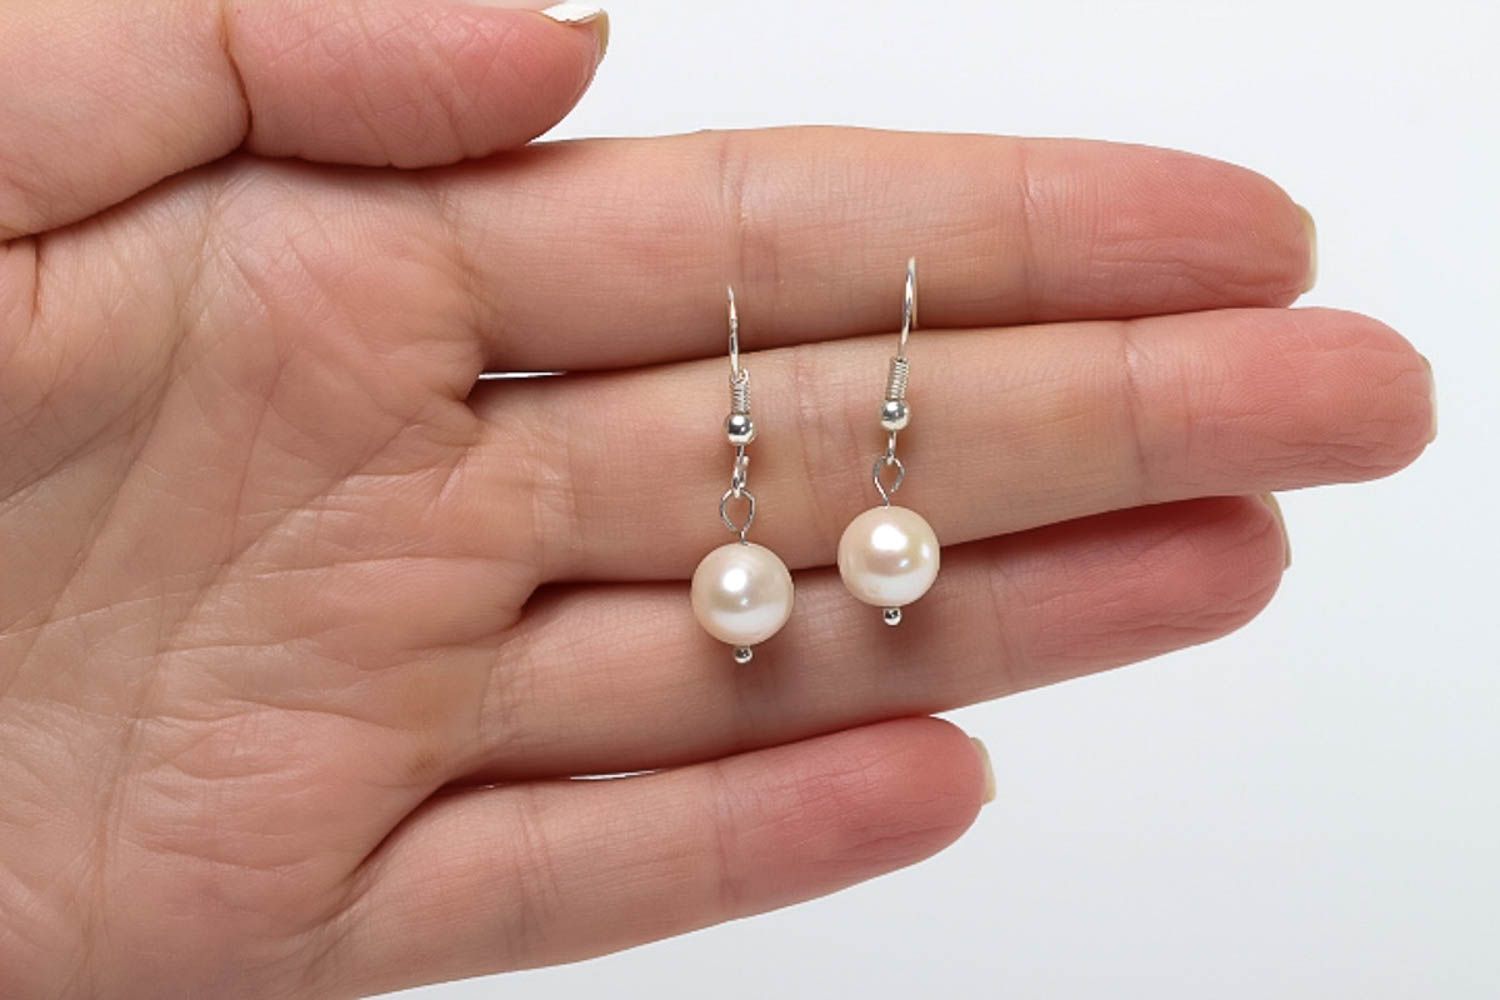 Handmade earrings with pearls earrings with charms designer accessories photo 5